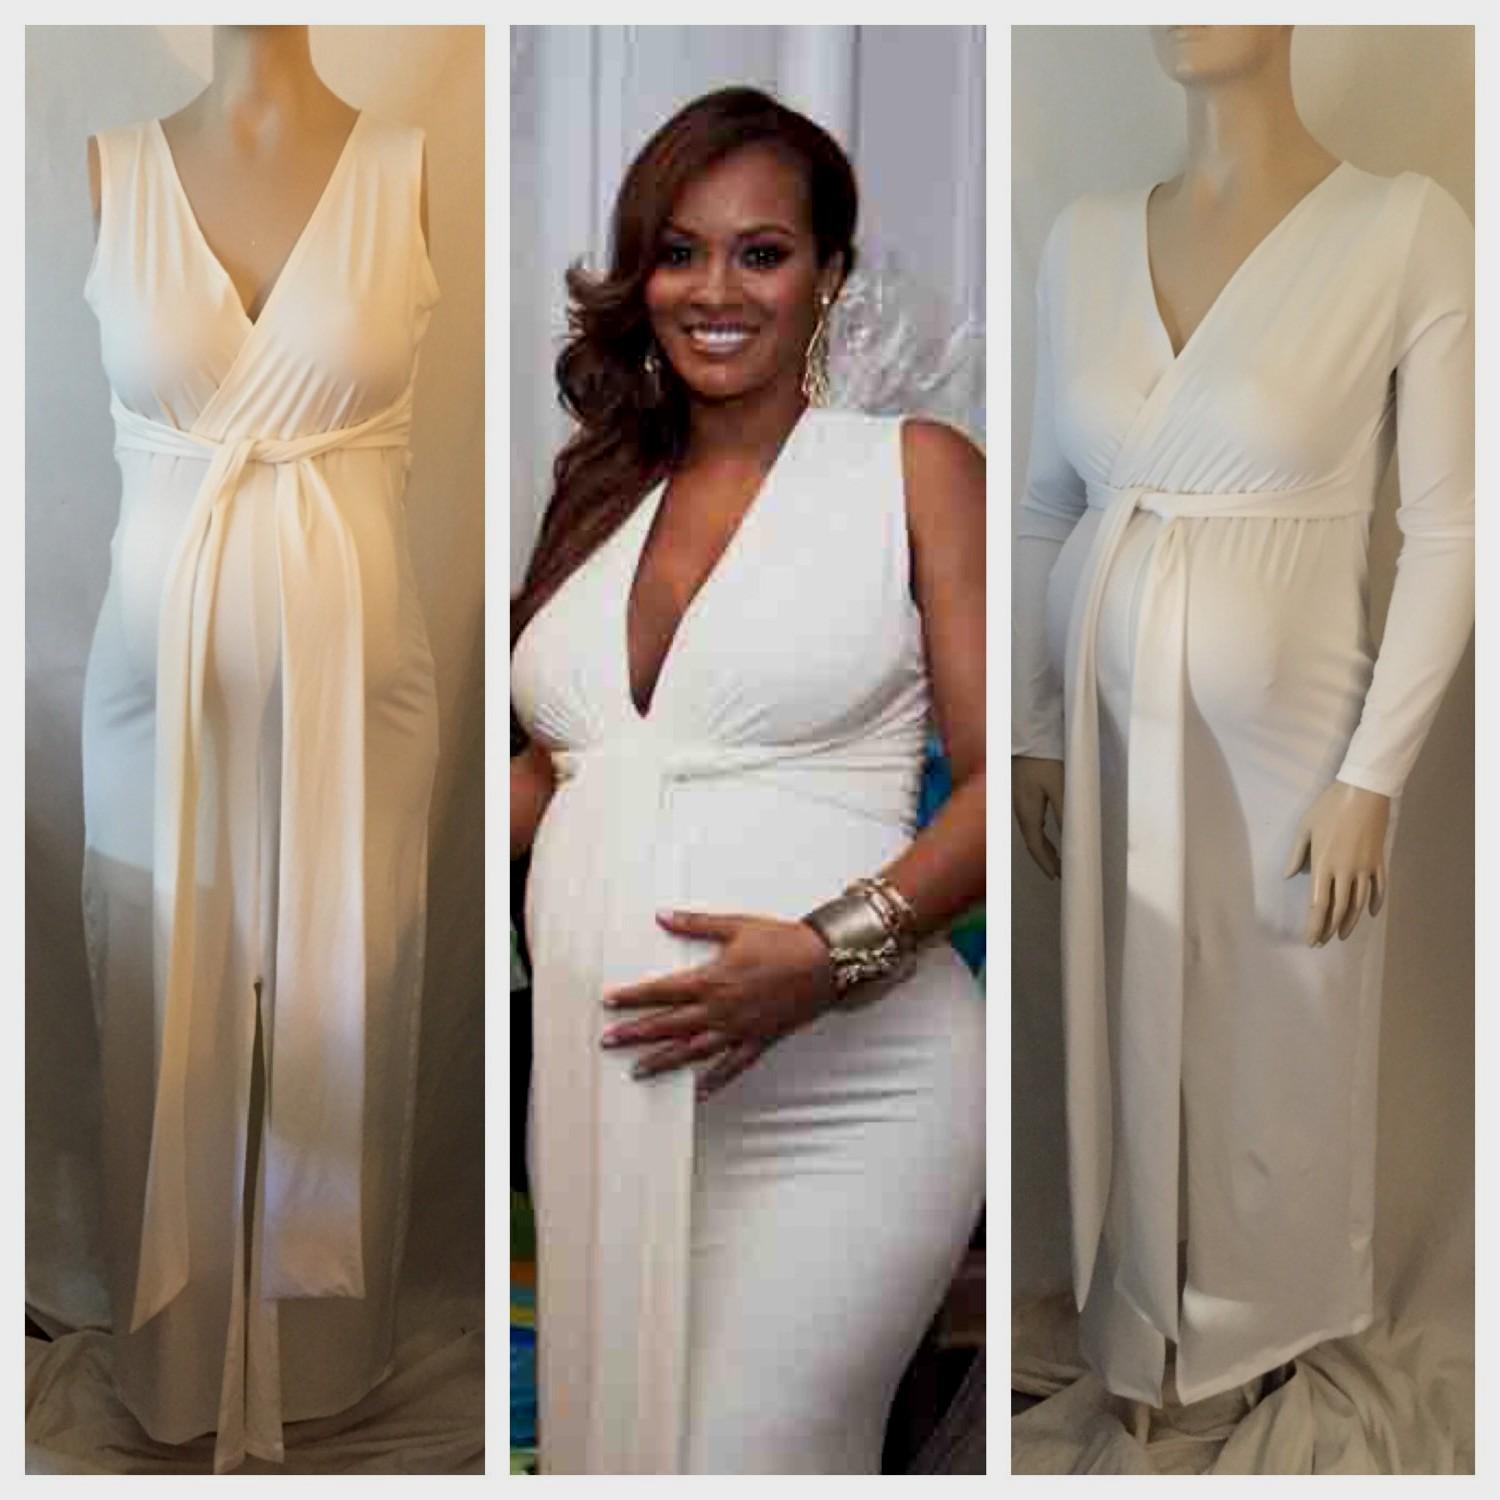 Full Size of Baby Shower:maternity Boutique Cute Maternity Dresses For Baby Shower Affordable Maternity Dresses For Baby Shower What To Wear To My Baby Shower Affordable Maternity Dresses For Baby Shower Long Maternity Dresses For Baby Shower Cheap Plus Size Maternity Clothes Baby Shower Dresses For Fall